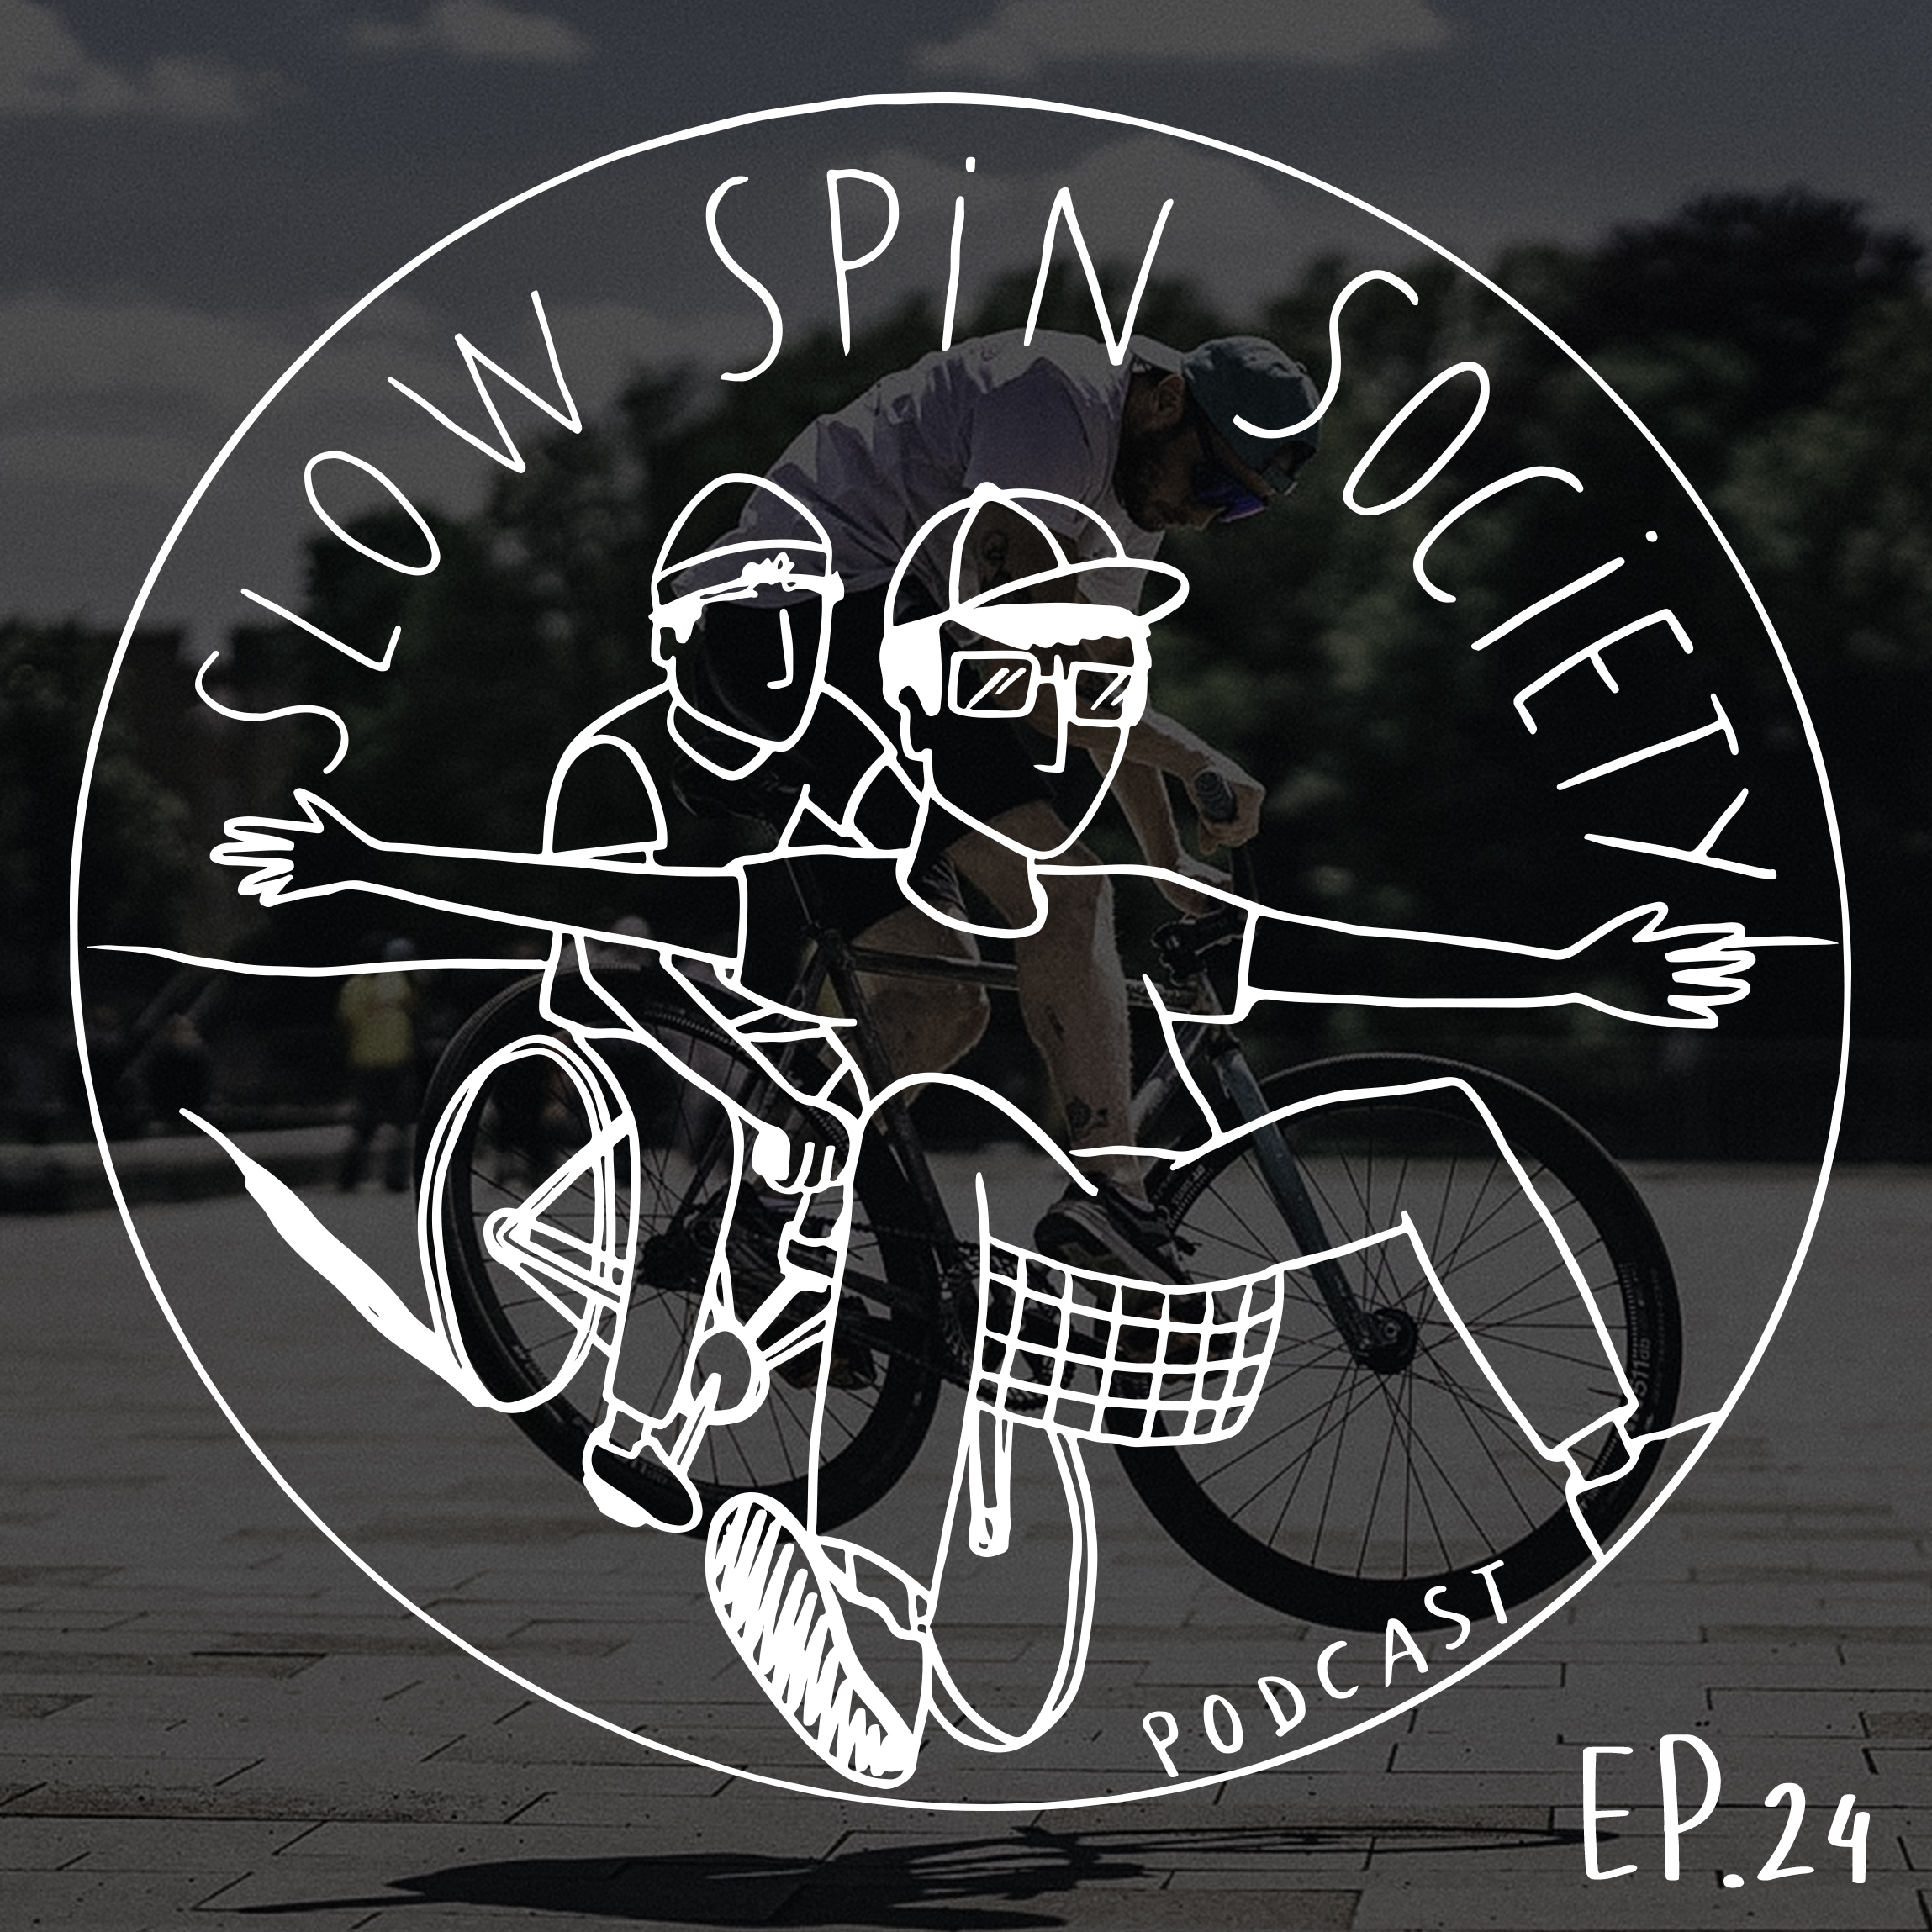 The Slow Spin Society Podcast Ep.24 : Rob returns with some fixed gear goodies!